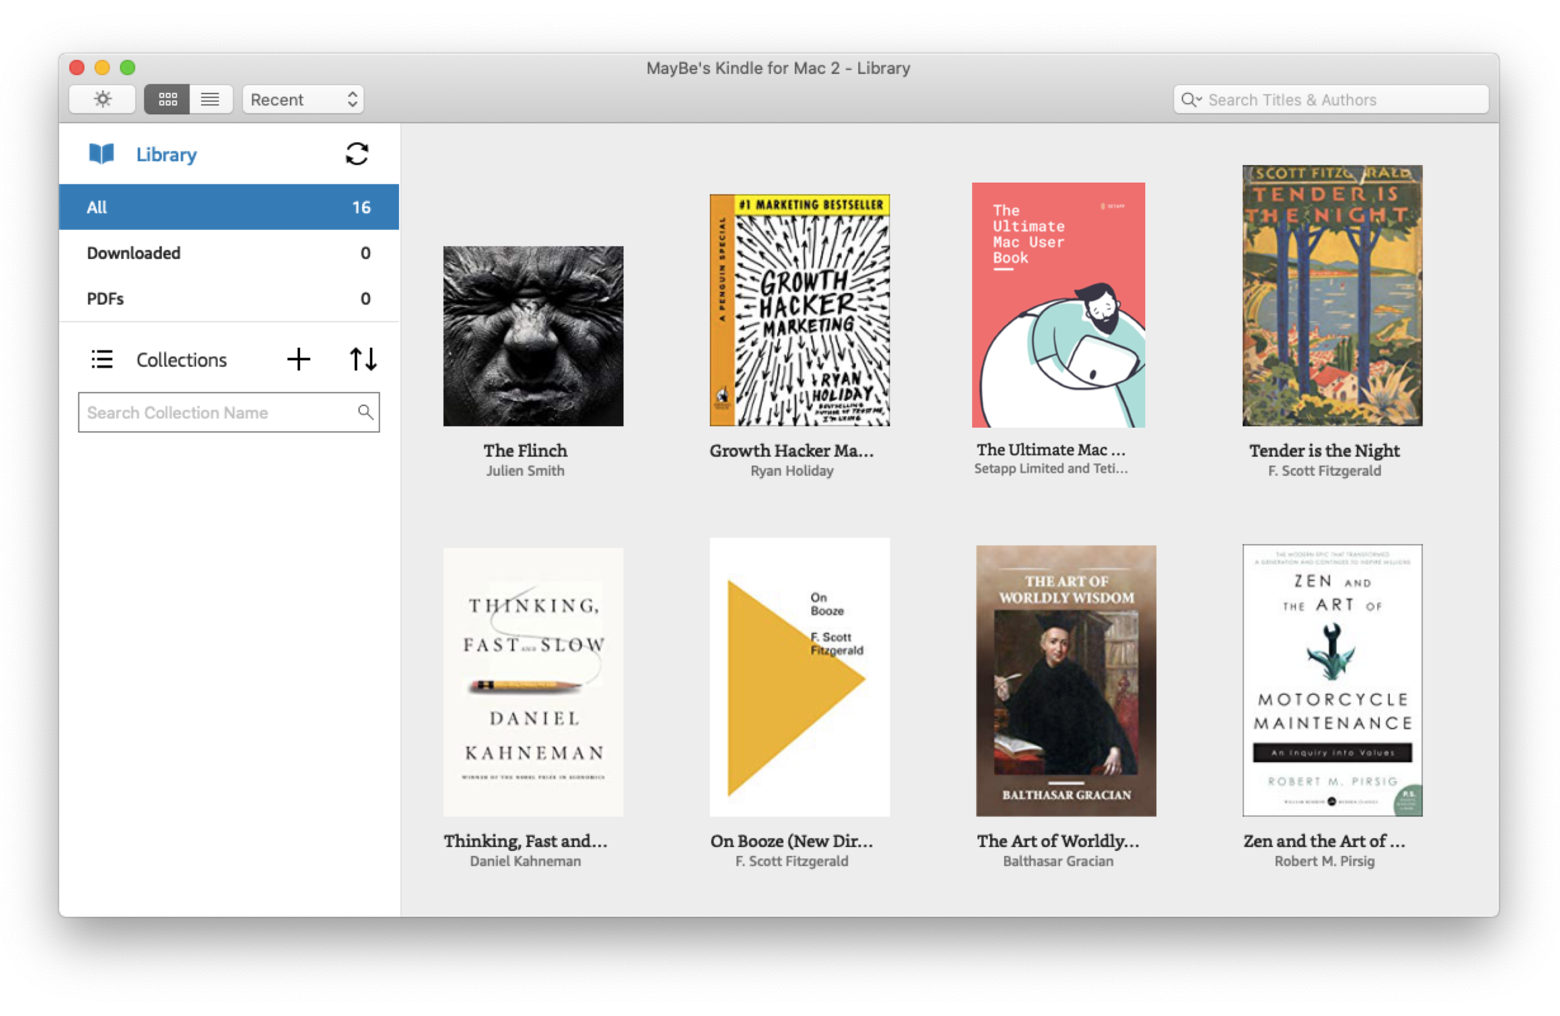 remove books from my kindle for mac library?